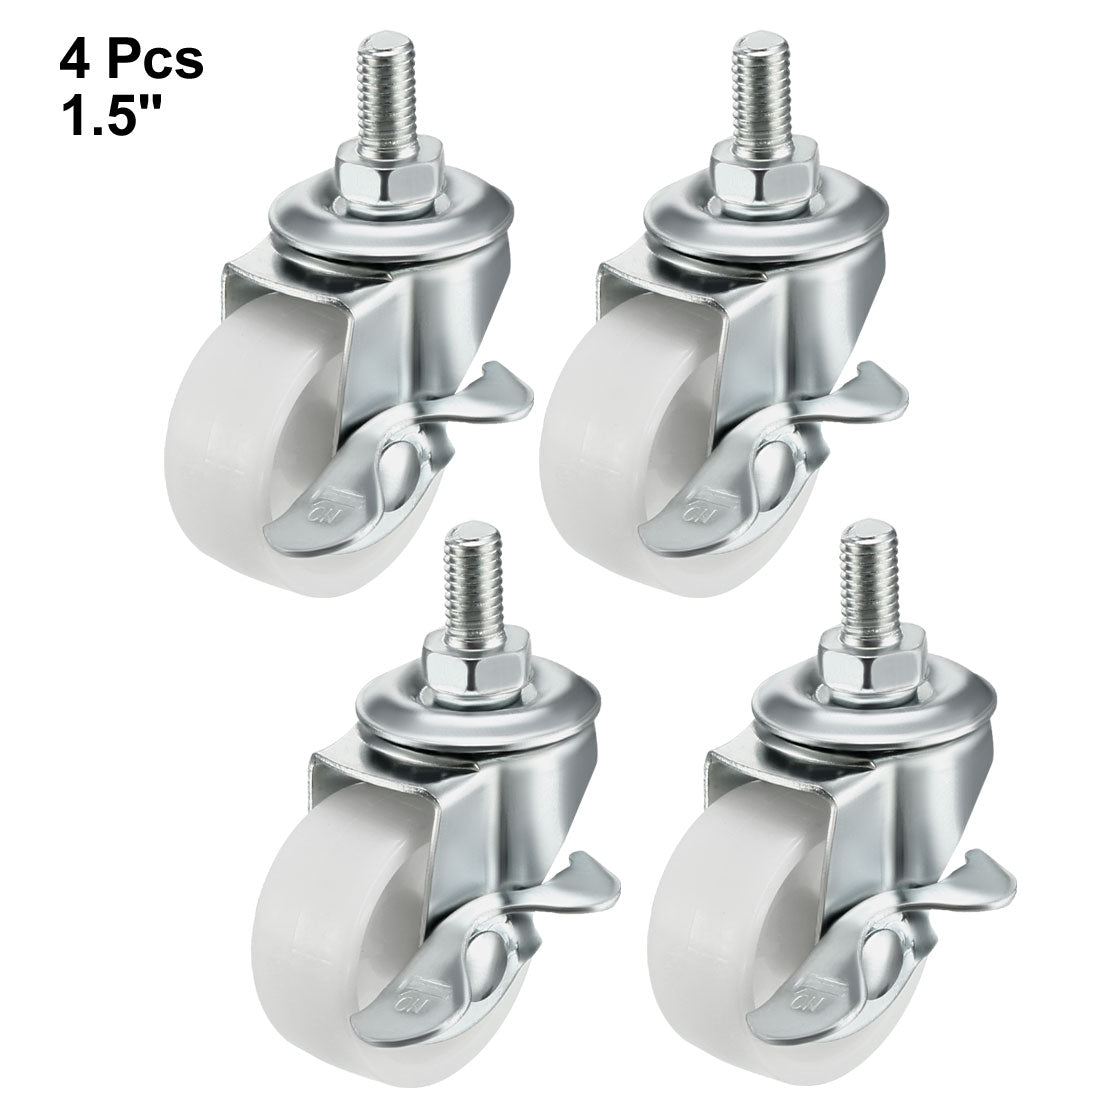 Uxcell Uxcell Swivel Caster Wheels 1.5 Inch PP 360 Degree M8 x 15mm Threaded Stem Caster Wheel with Brake , 22lb Capacity Each, 4 Pcs